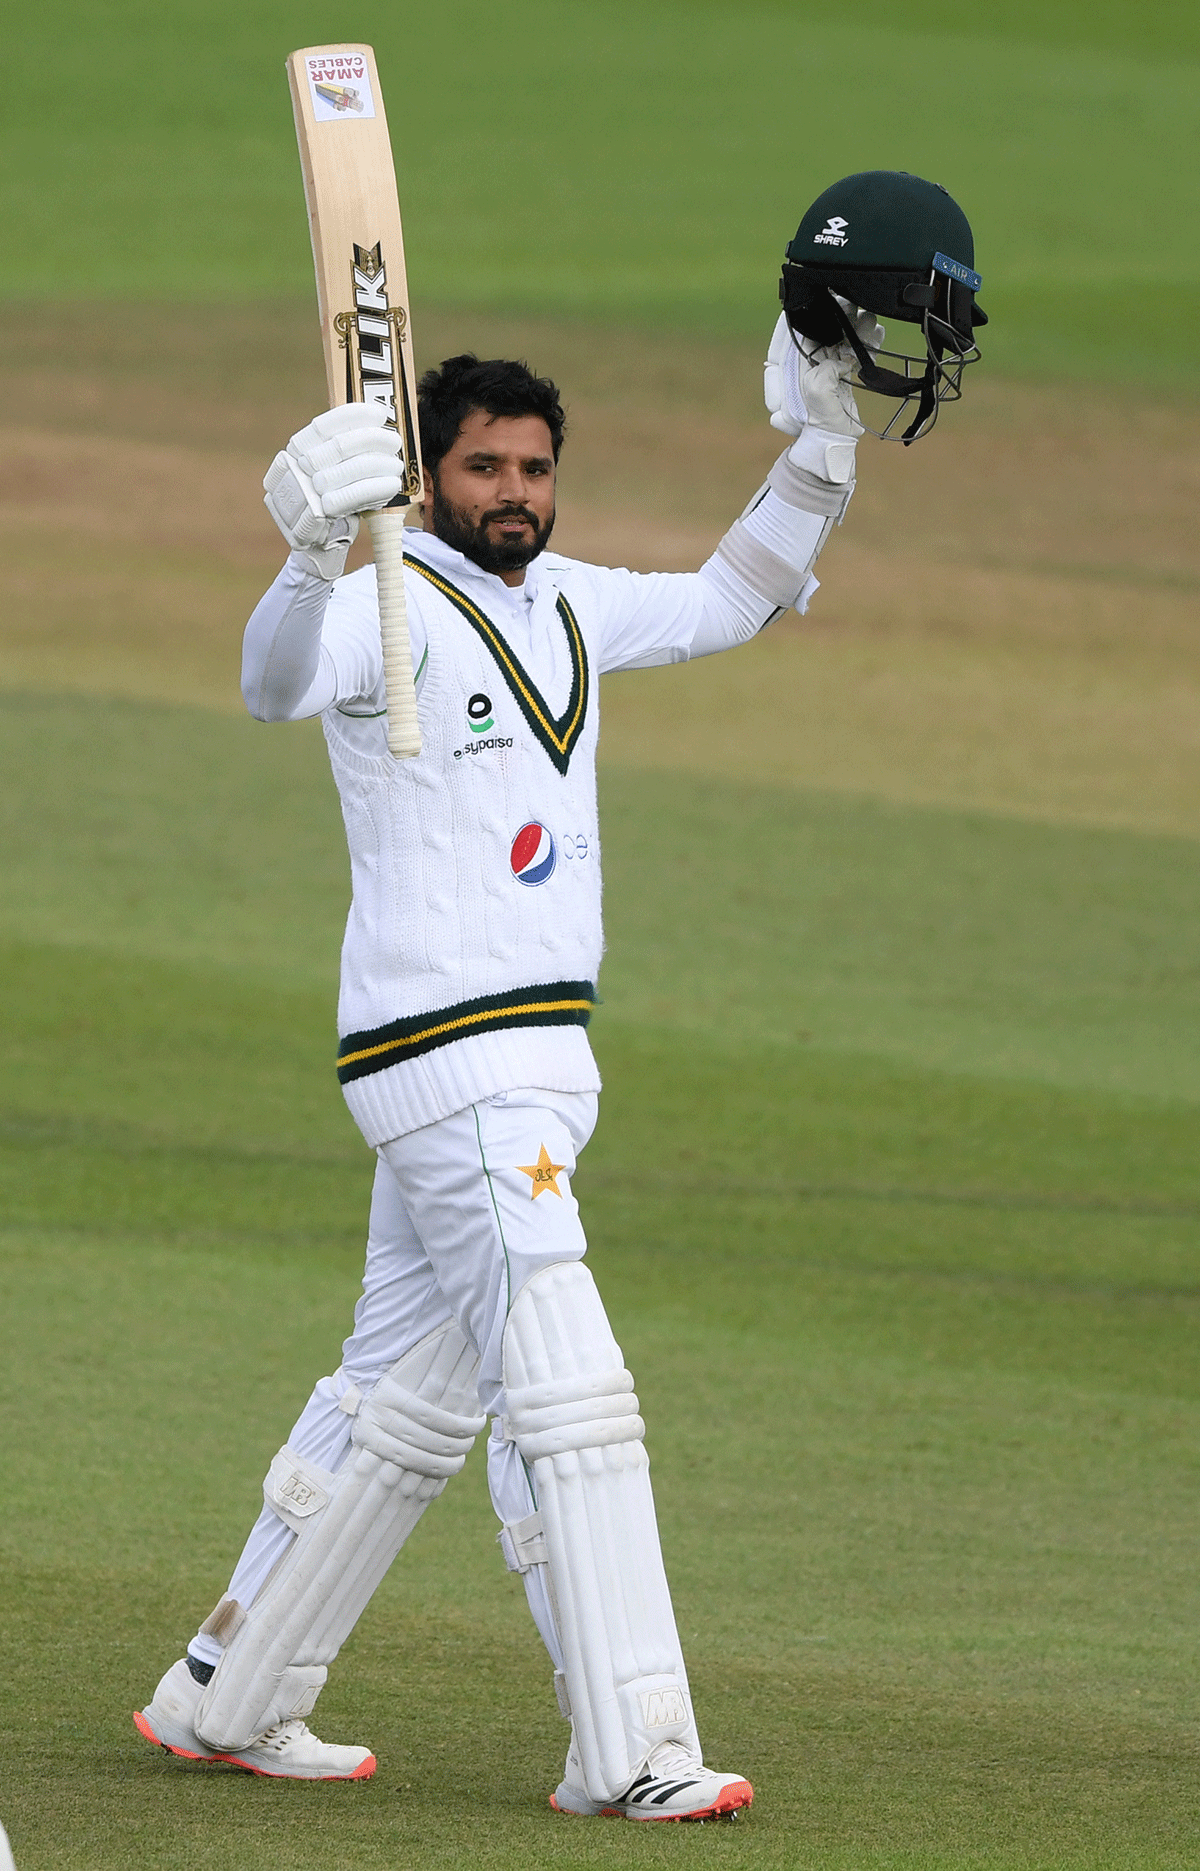 The 37-year-old Azhar Ali played 53 one-Day internationals before quitting the format and does not play T20 cricket for the national team